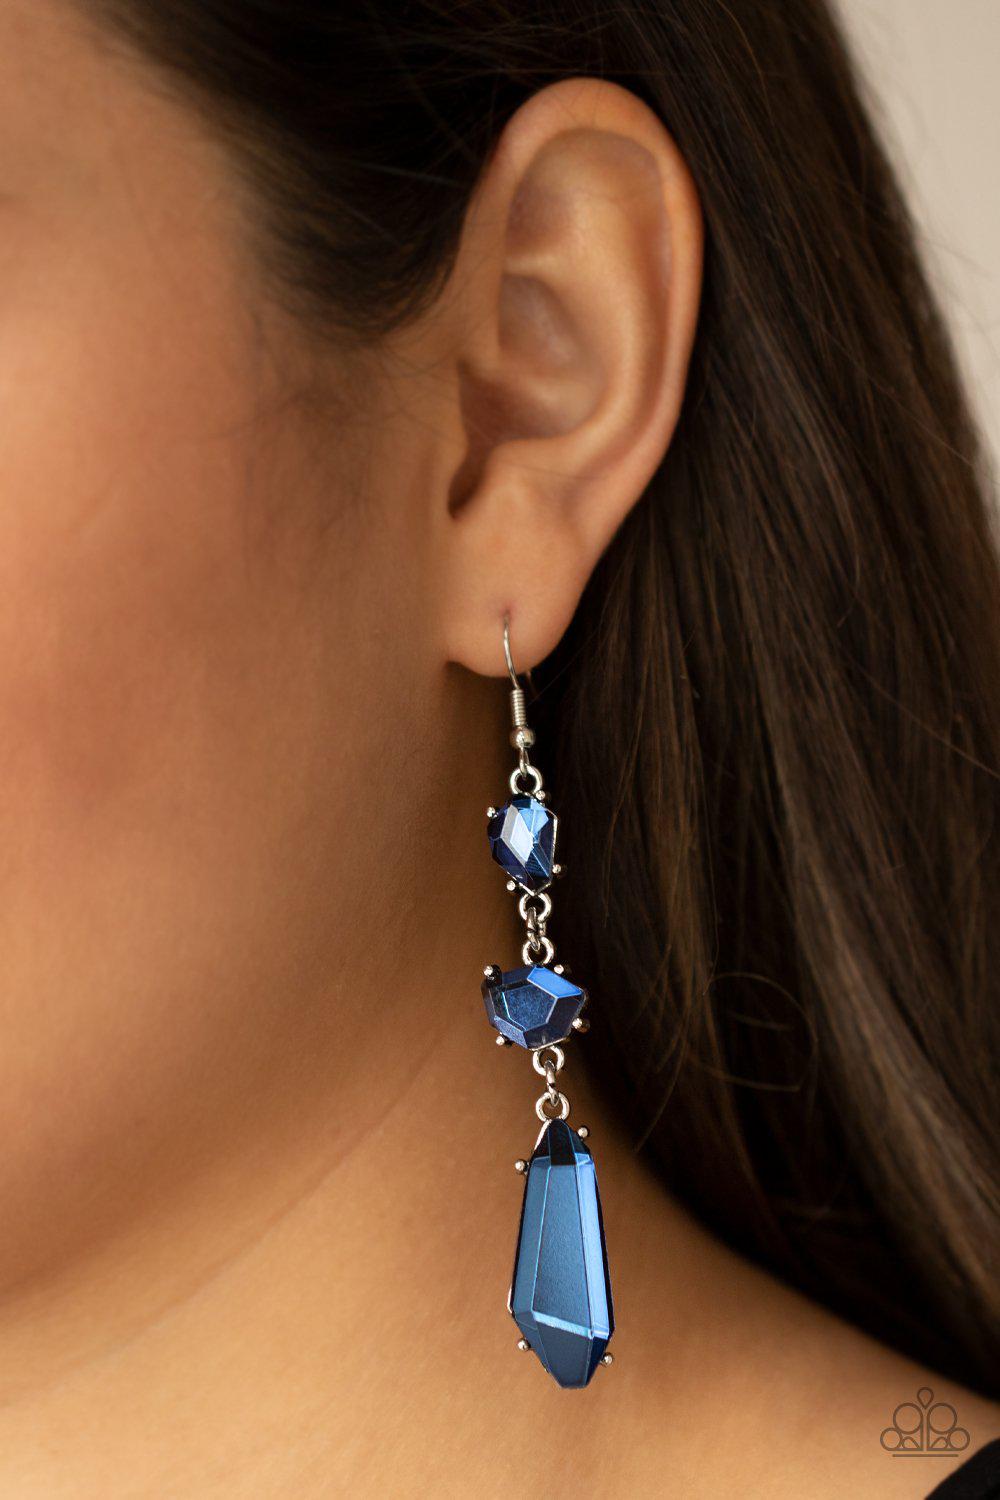 Sophisticated Smolder Blue Rhinestone Earrings - Paparazzi Accessories- model - CarasShop.com - $5 Jewelry by Cara Jewels